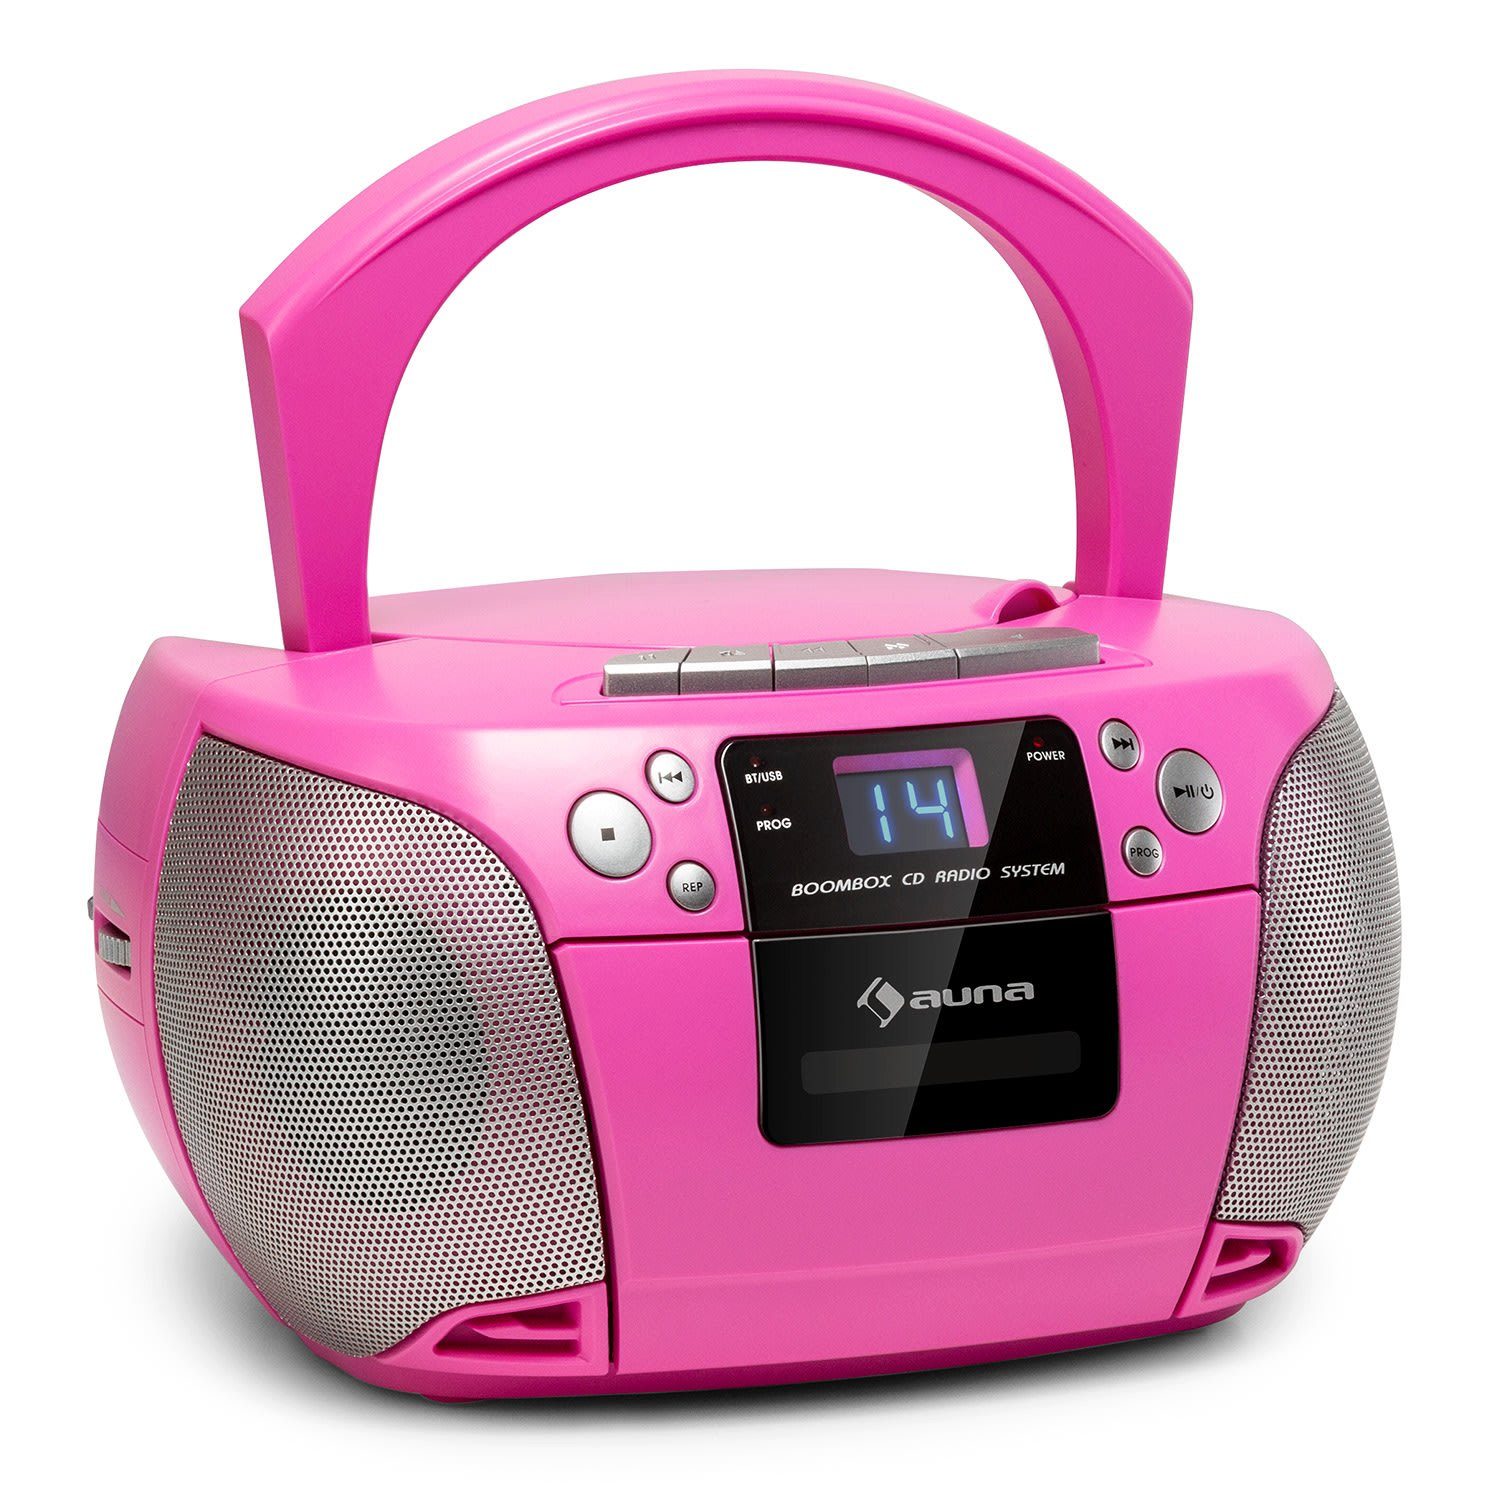 Boombox Stereoanlage Radio CD-Player Bluetooth Kassette UKW AUX USB vers Farben 